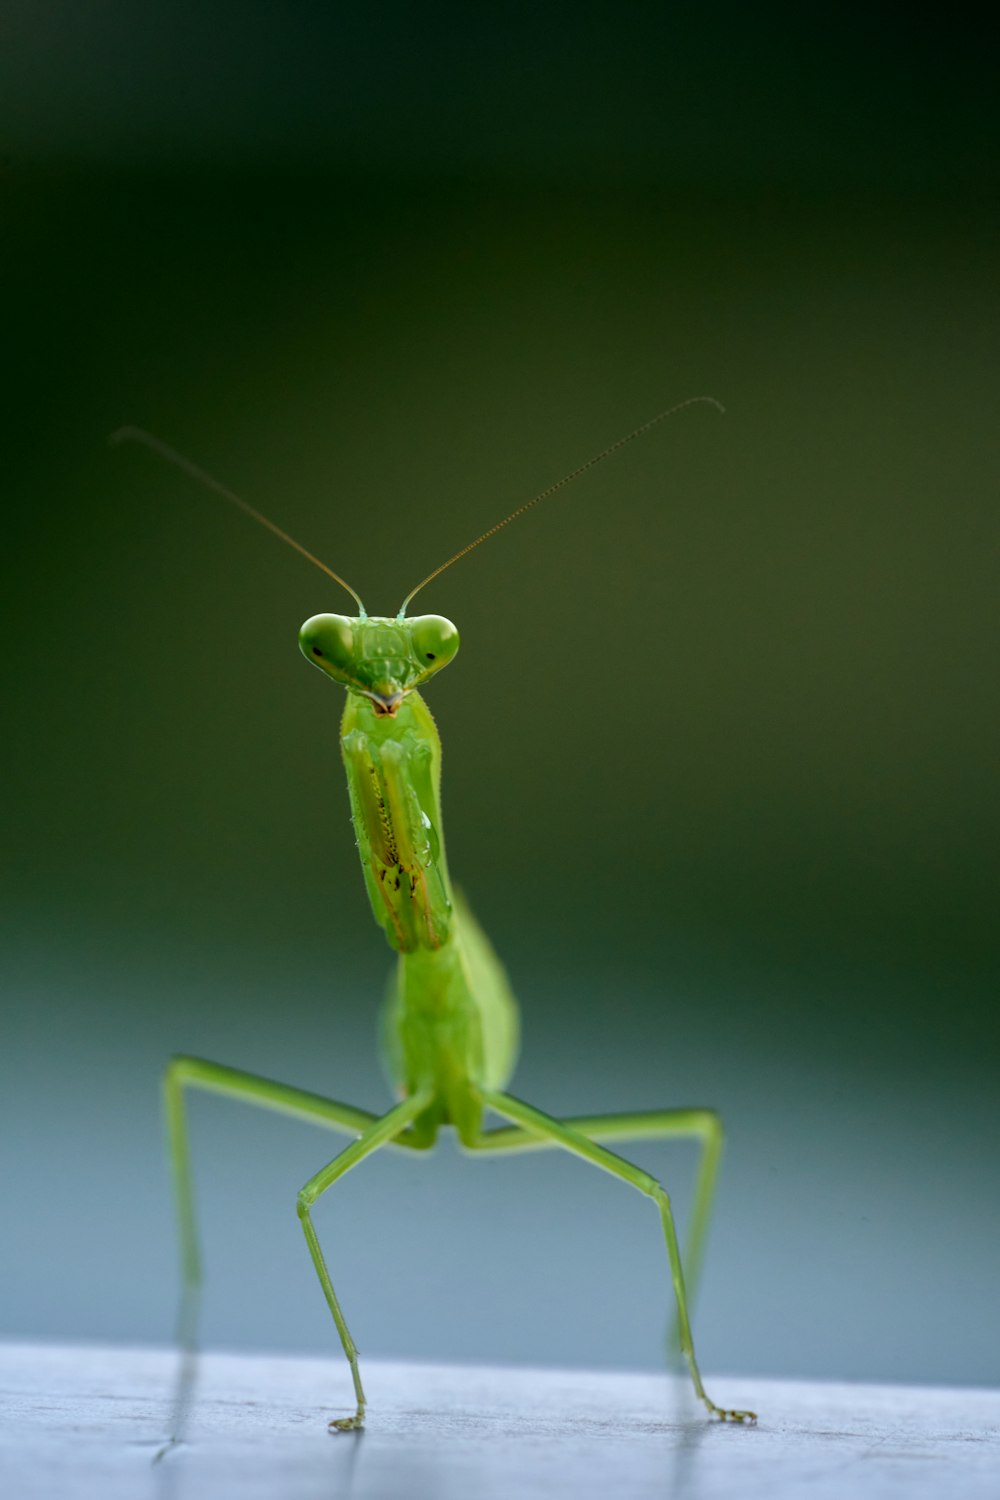 a green insect with a long antennas